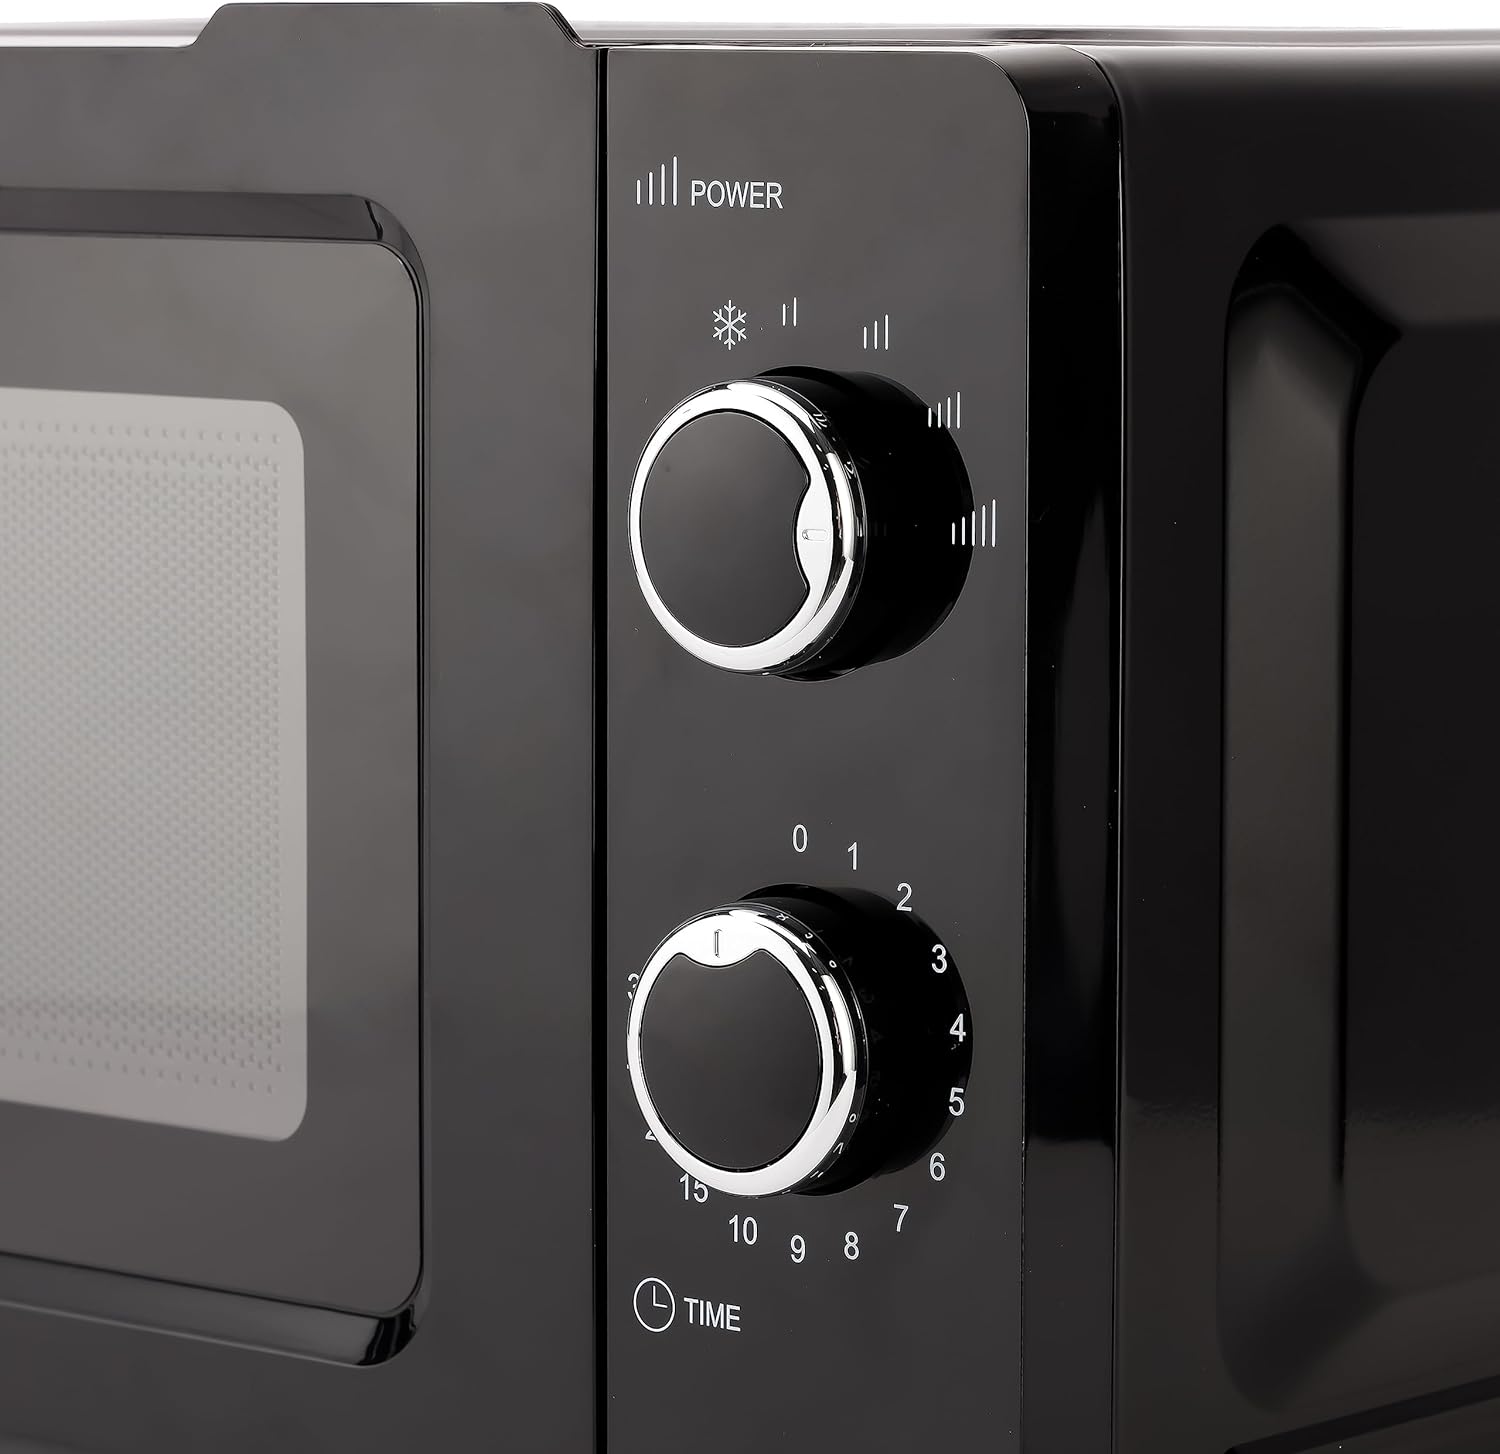 Geepas Microwave Oven With Easy Reheat Defrost Digital Display 20 L 1100 W GMO1899-20LS-BL Black